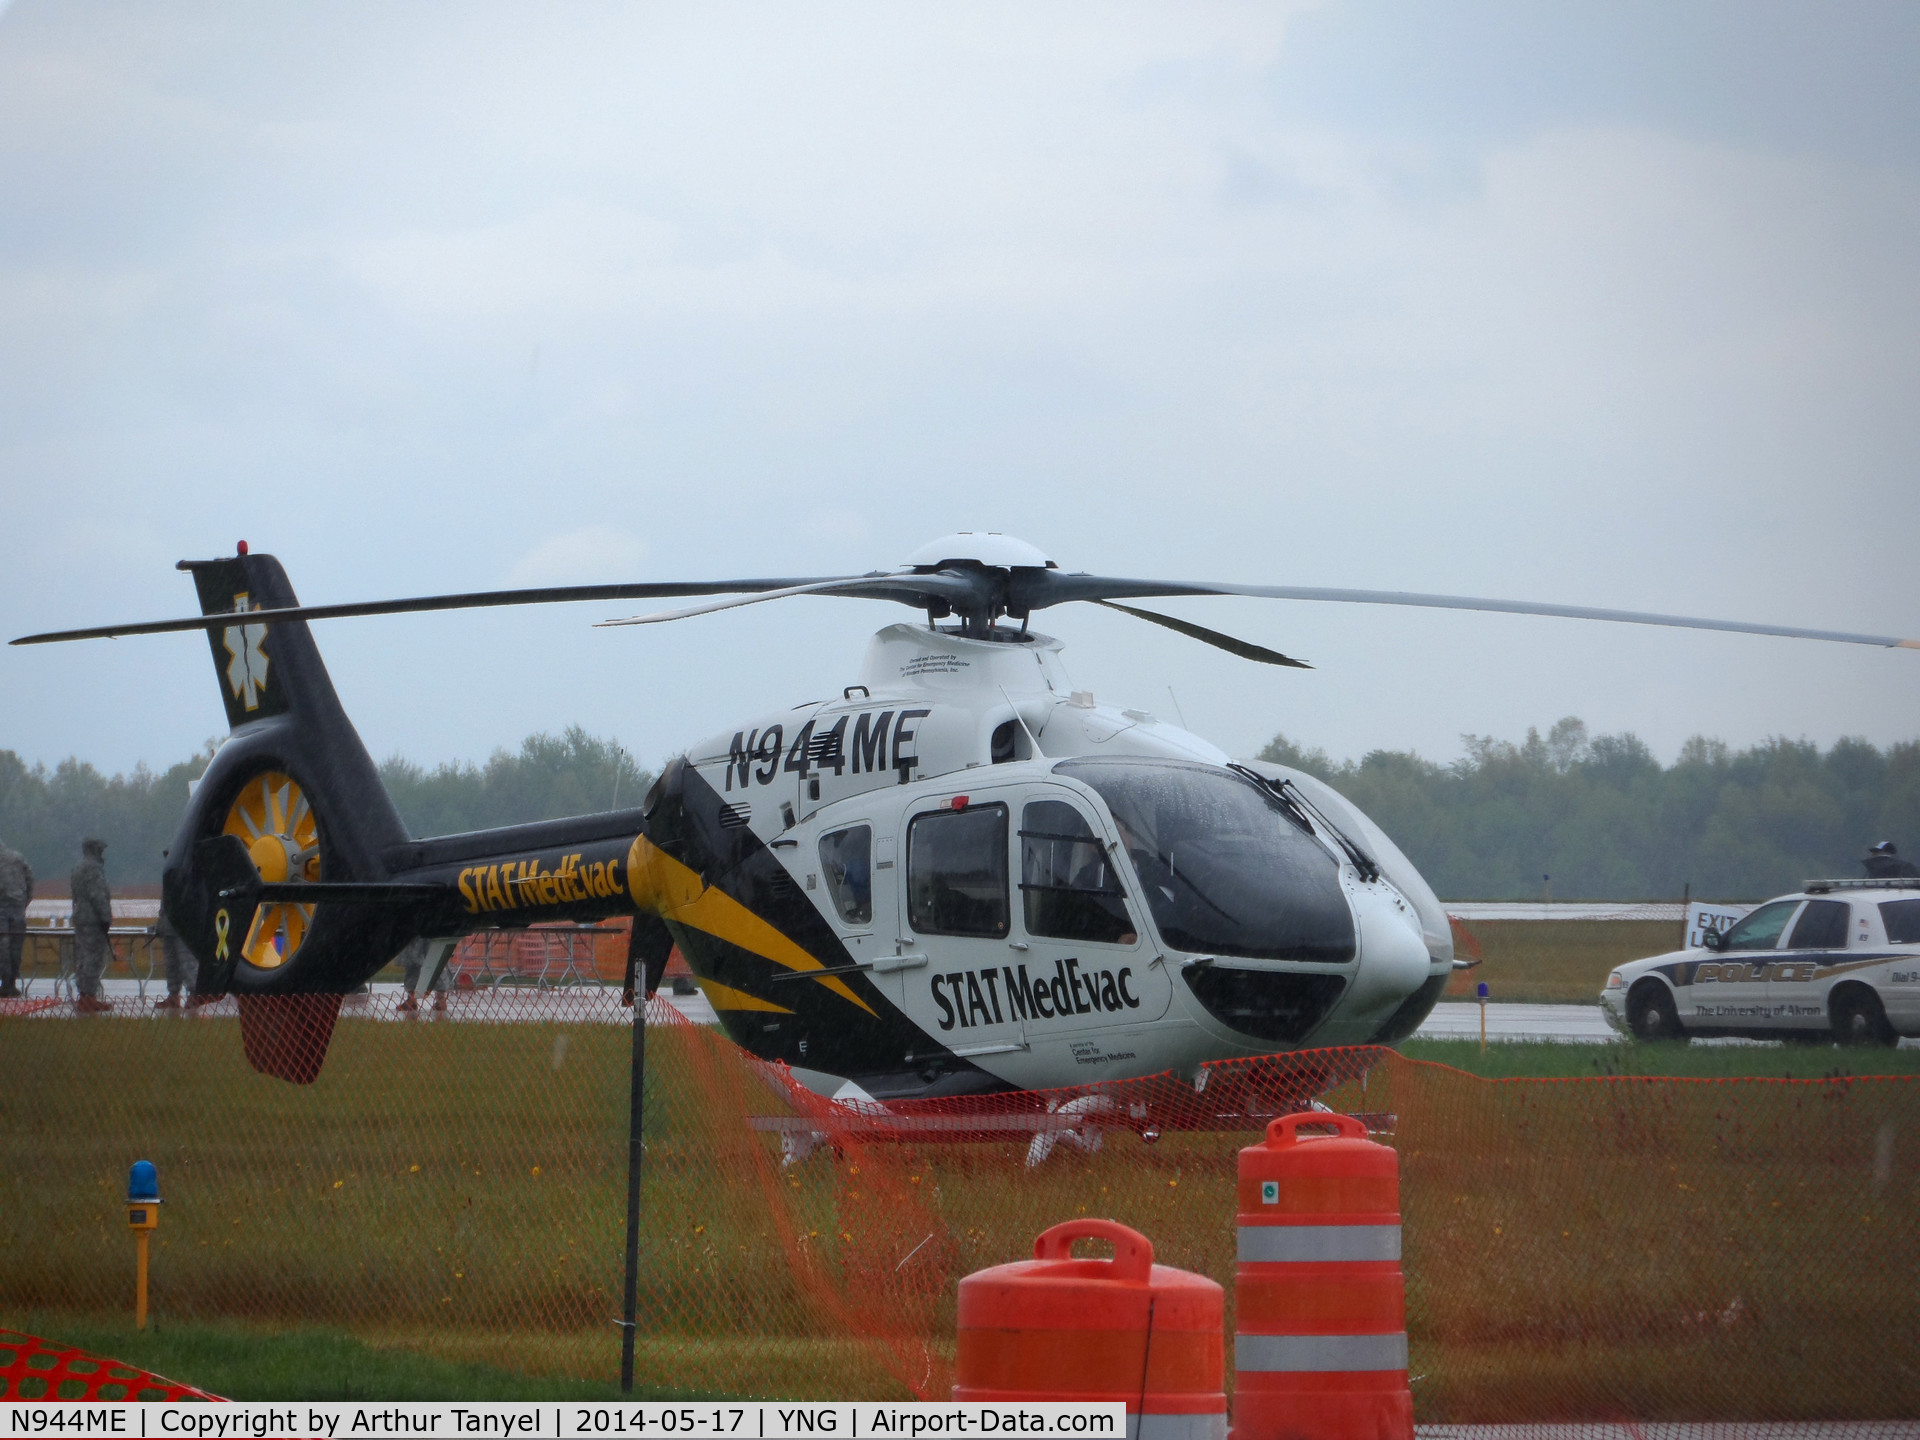 N944ME, 2010 Eurocopter EC-135T-2+ C/N 0945, @ Youngstown Airport